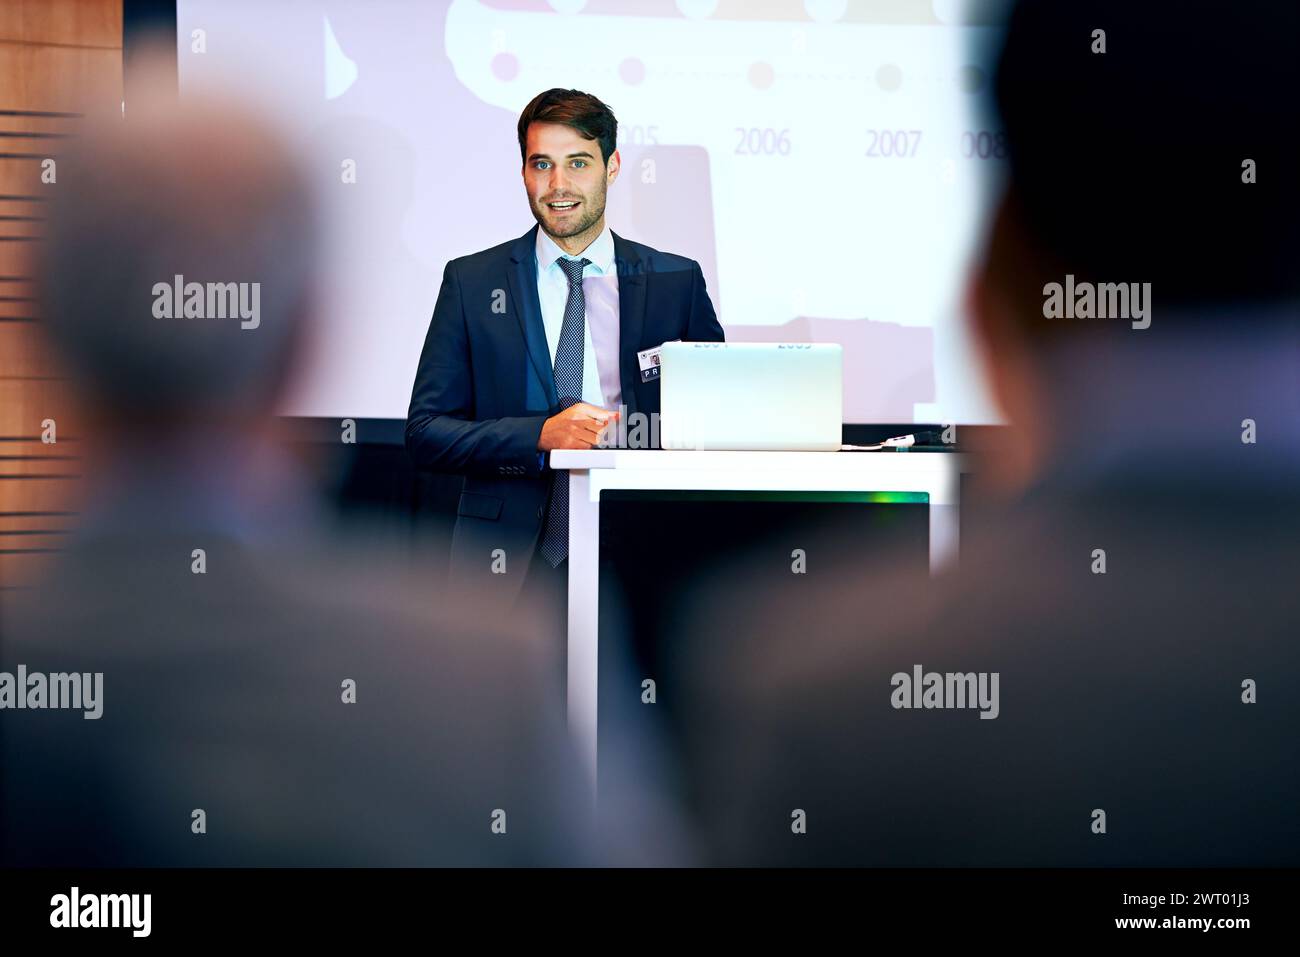 Business man, podium and presentation with projector screen, conference or workshop with laptop for slideshow. Corporate training, seminar and speaker Stock Photo